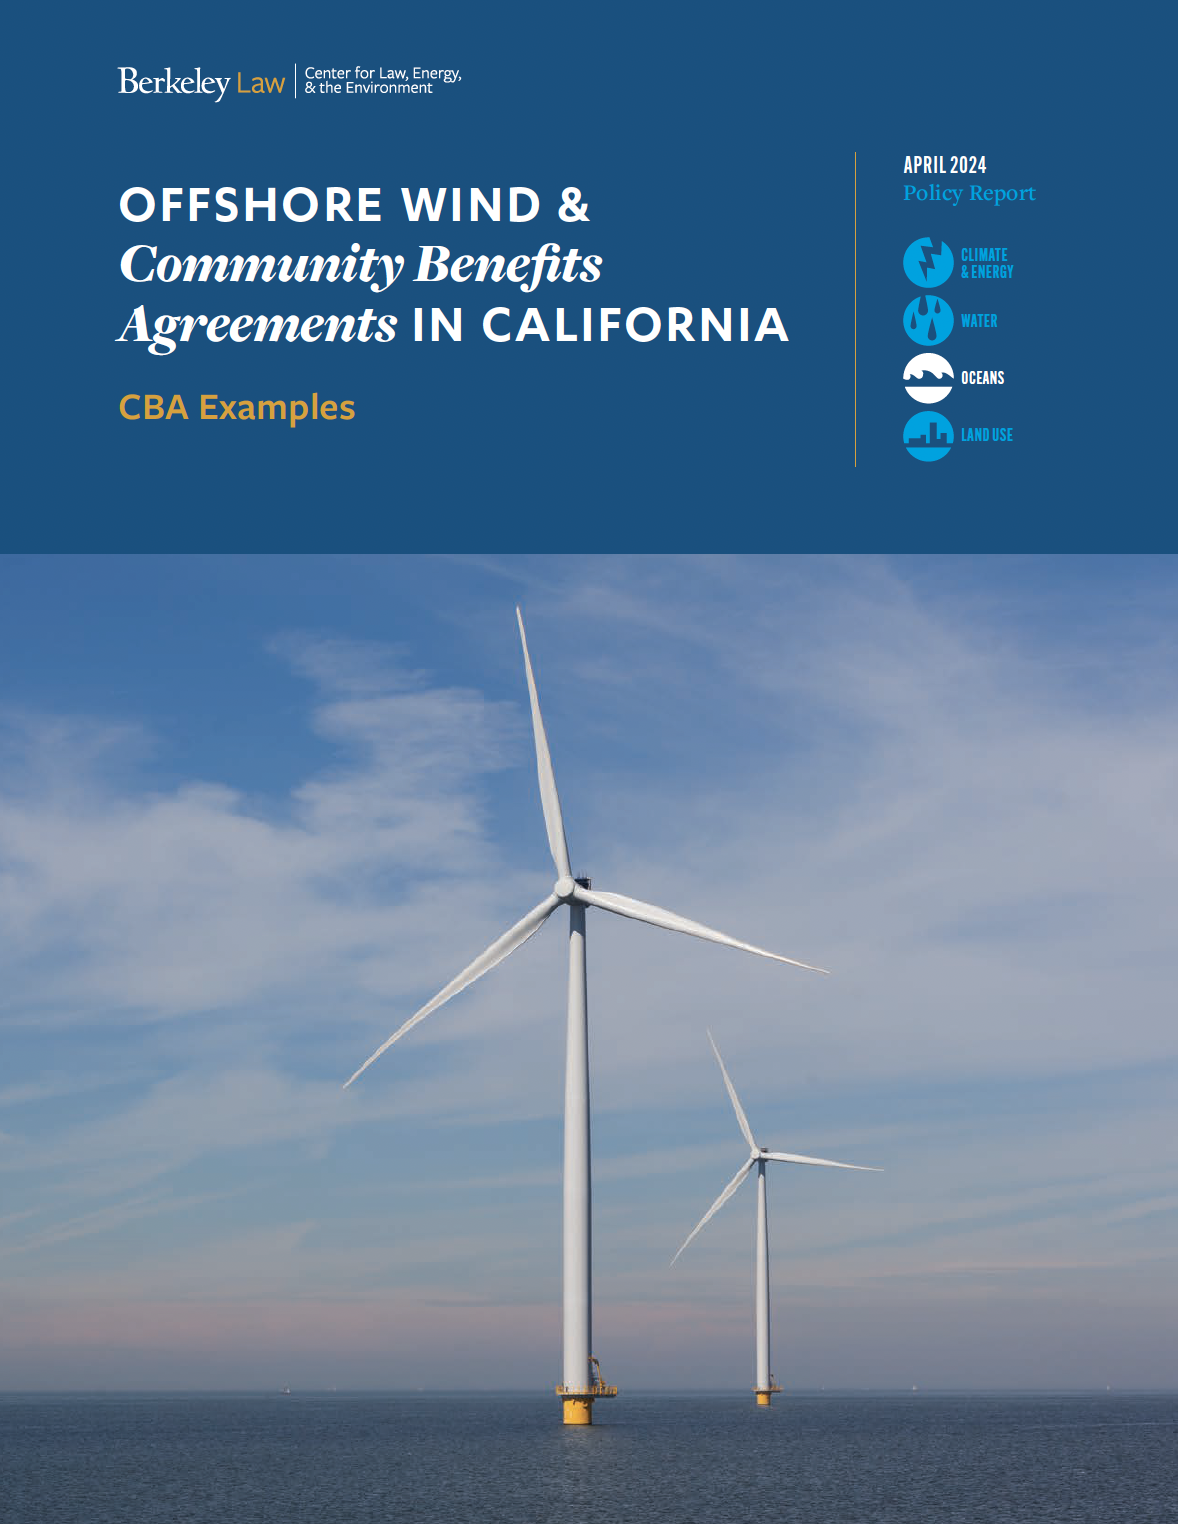 Report cover with wind turbines in the background. Blue banner at the top reads: "Title reads: "OFFSHORE WIND & Community Benefits Agreements IN CALIFORNIA"